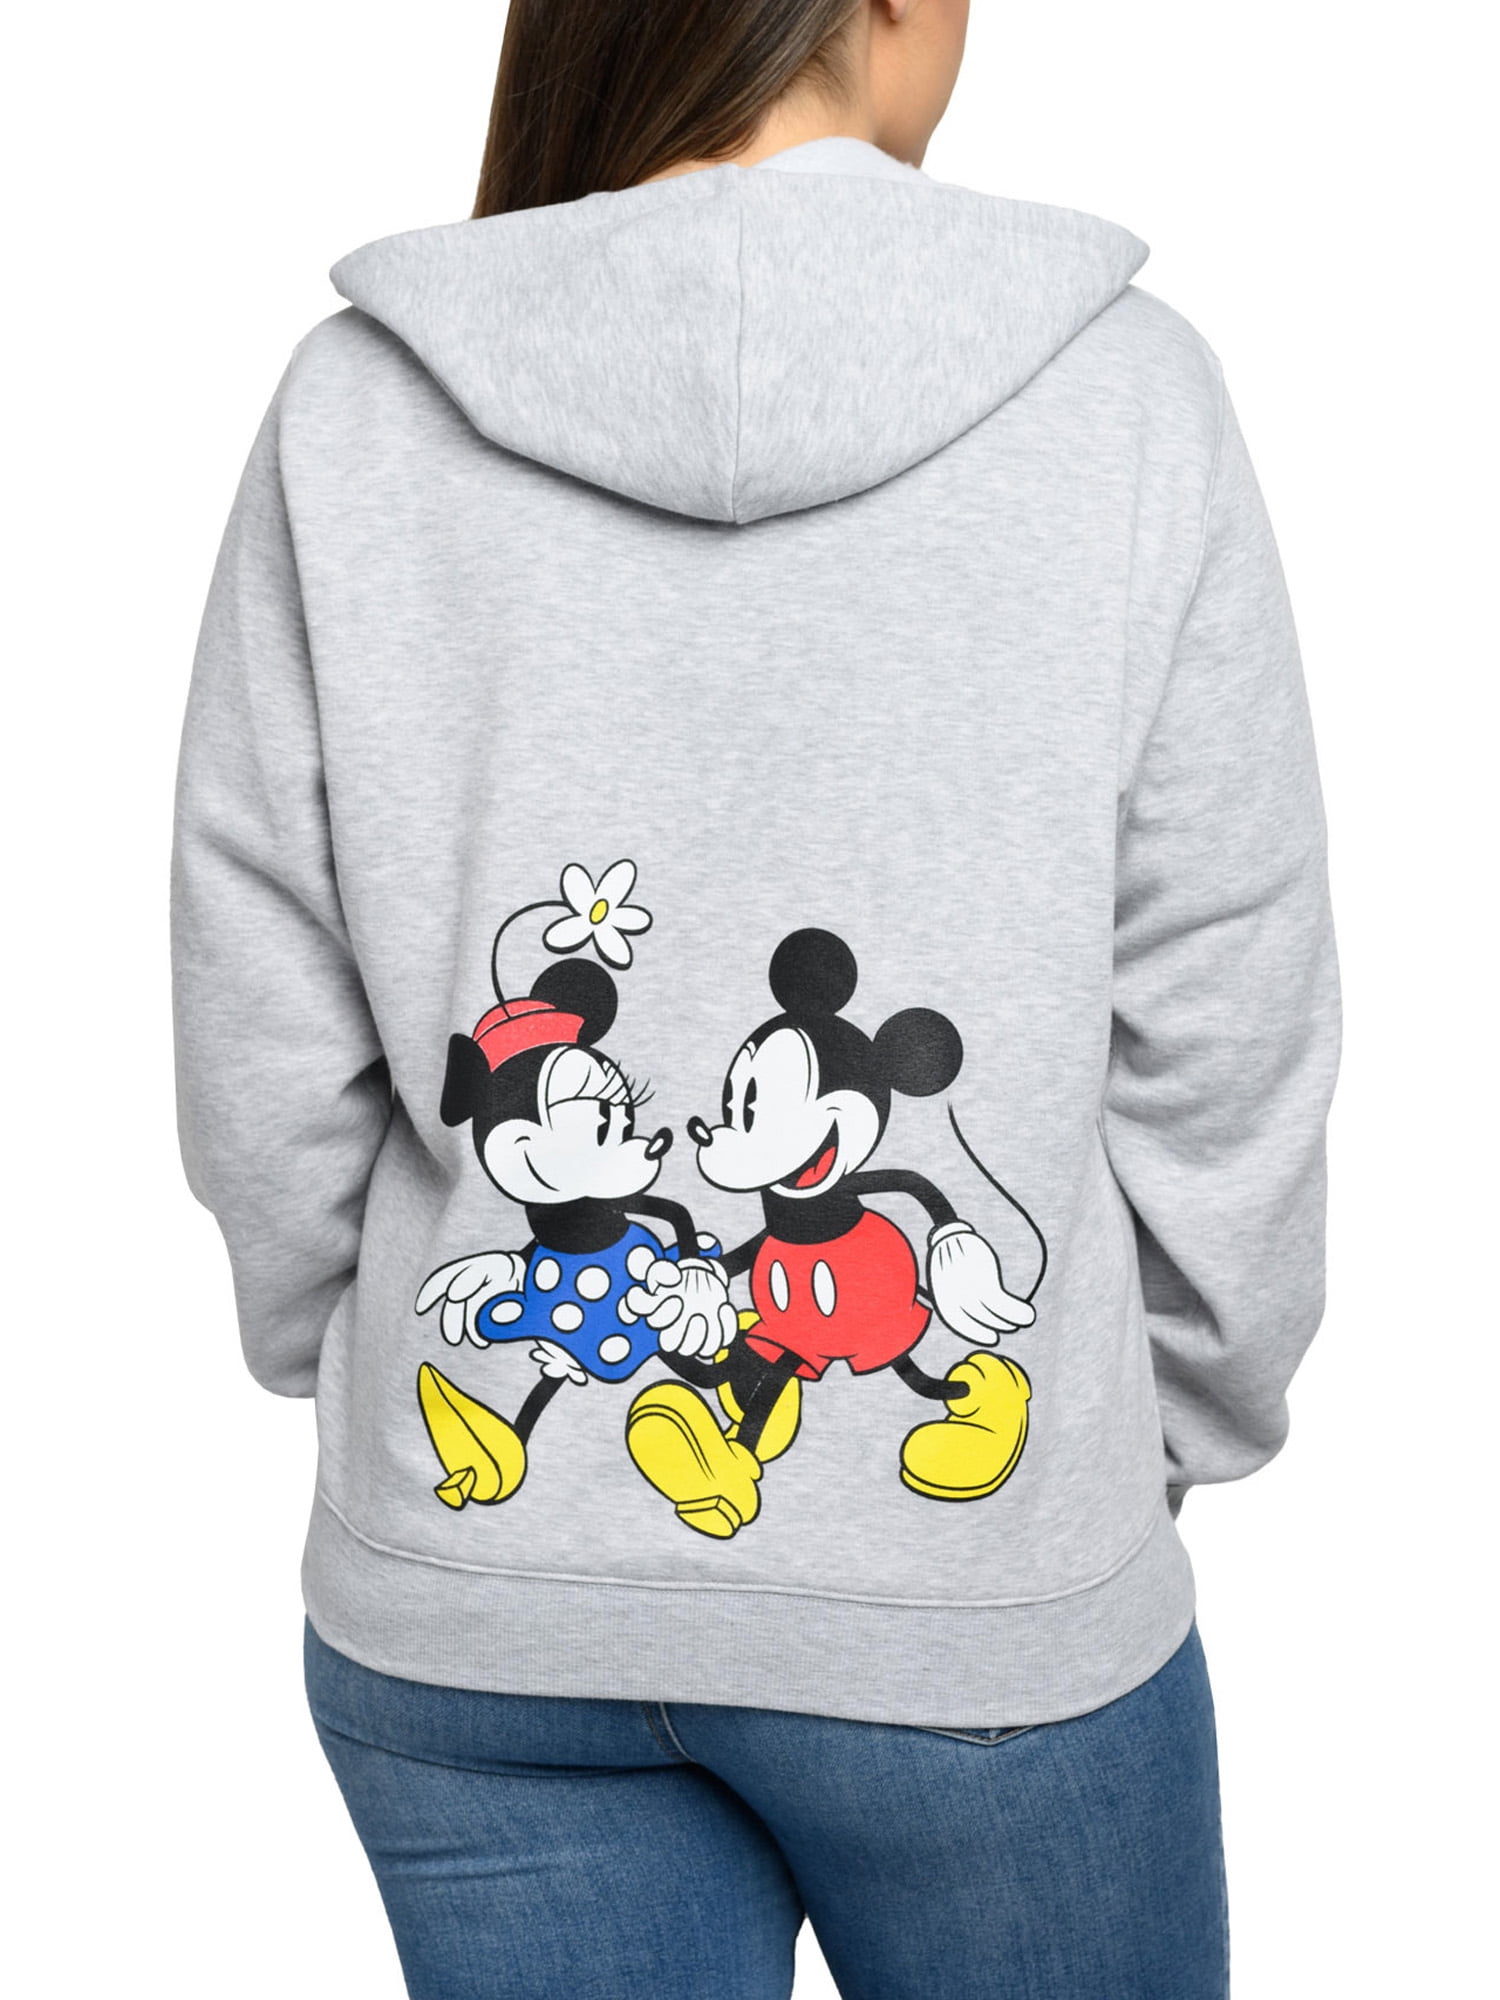 Disney Mickey Mouse Long Sleeve Pullover with Cut Out and Off The Shoulder Sweatshirt for Women Gray